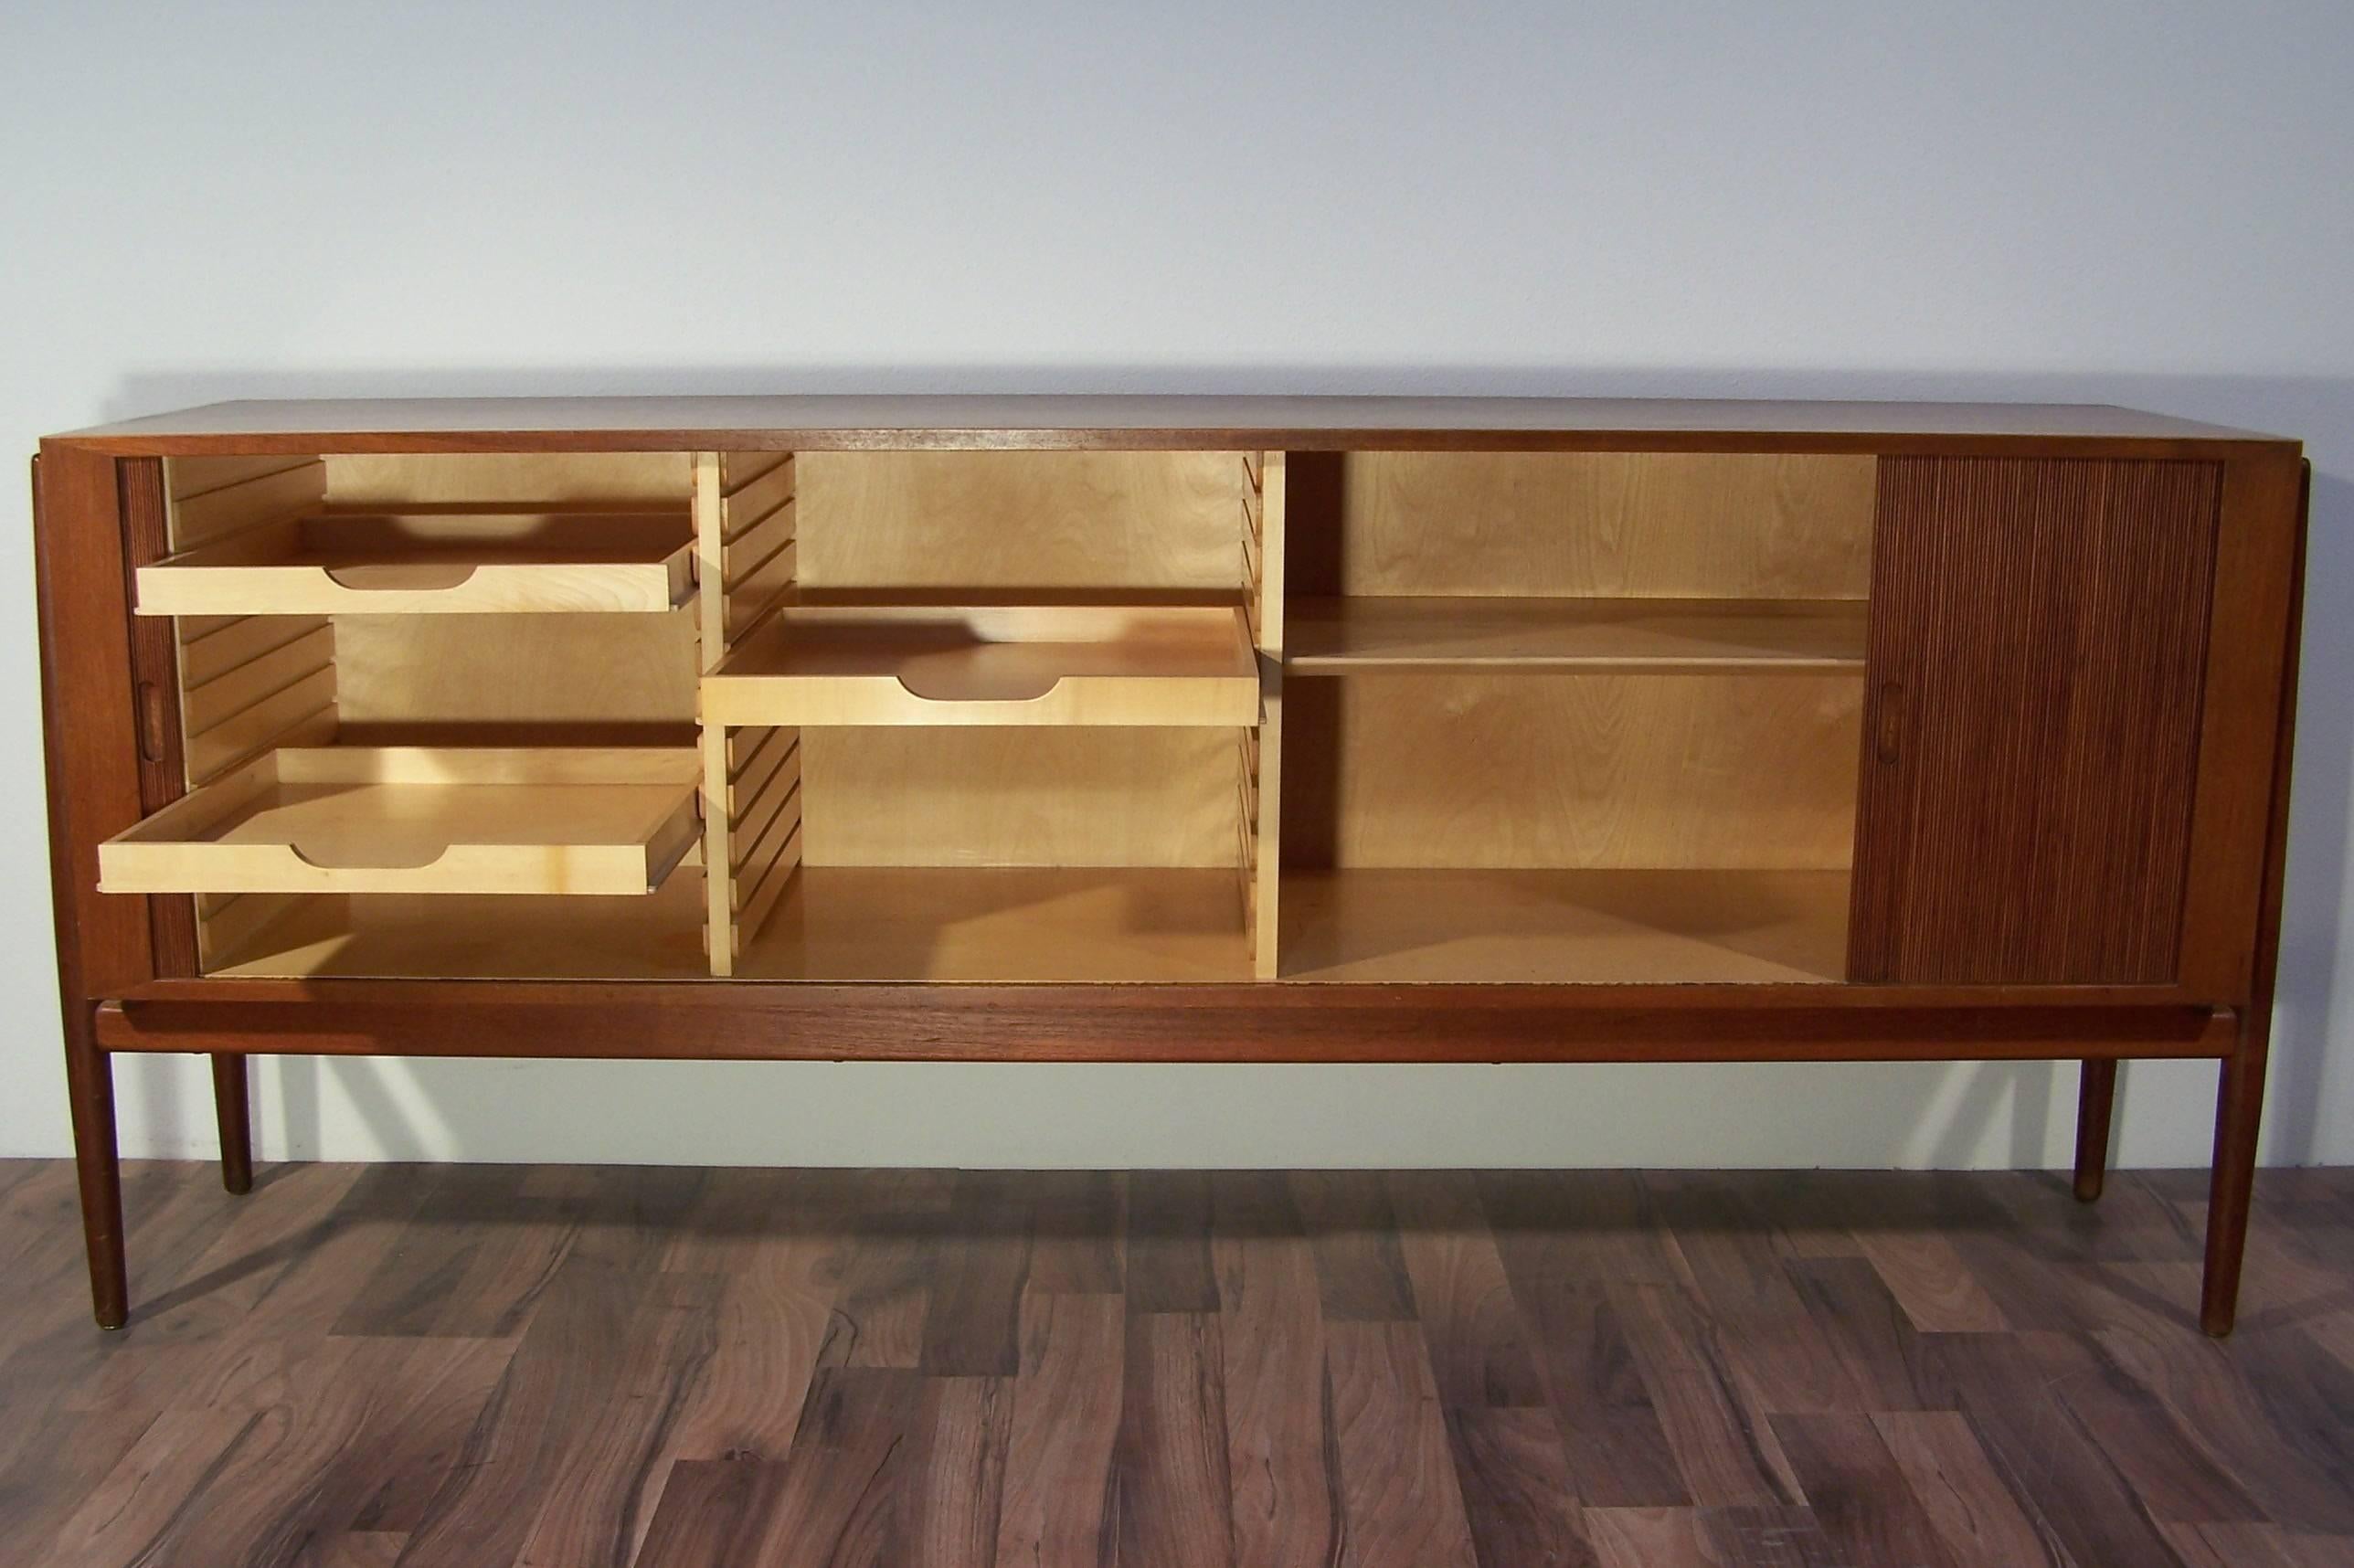 Finn Juhl designed this stunning sideboard circa 1954 for Niels Vodder. This sideboard has elegant tambour doors which open into the sides of the case.
The interior is made of birch wood and contains three drawers and one shelf. It has an